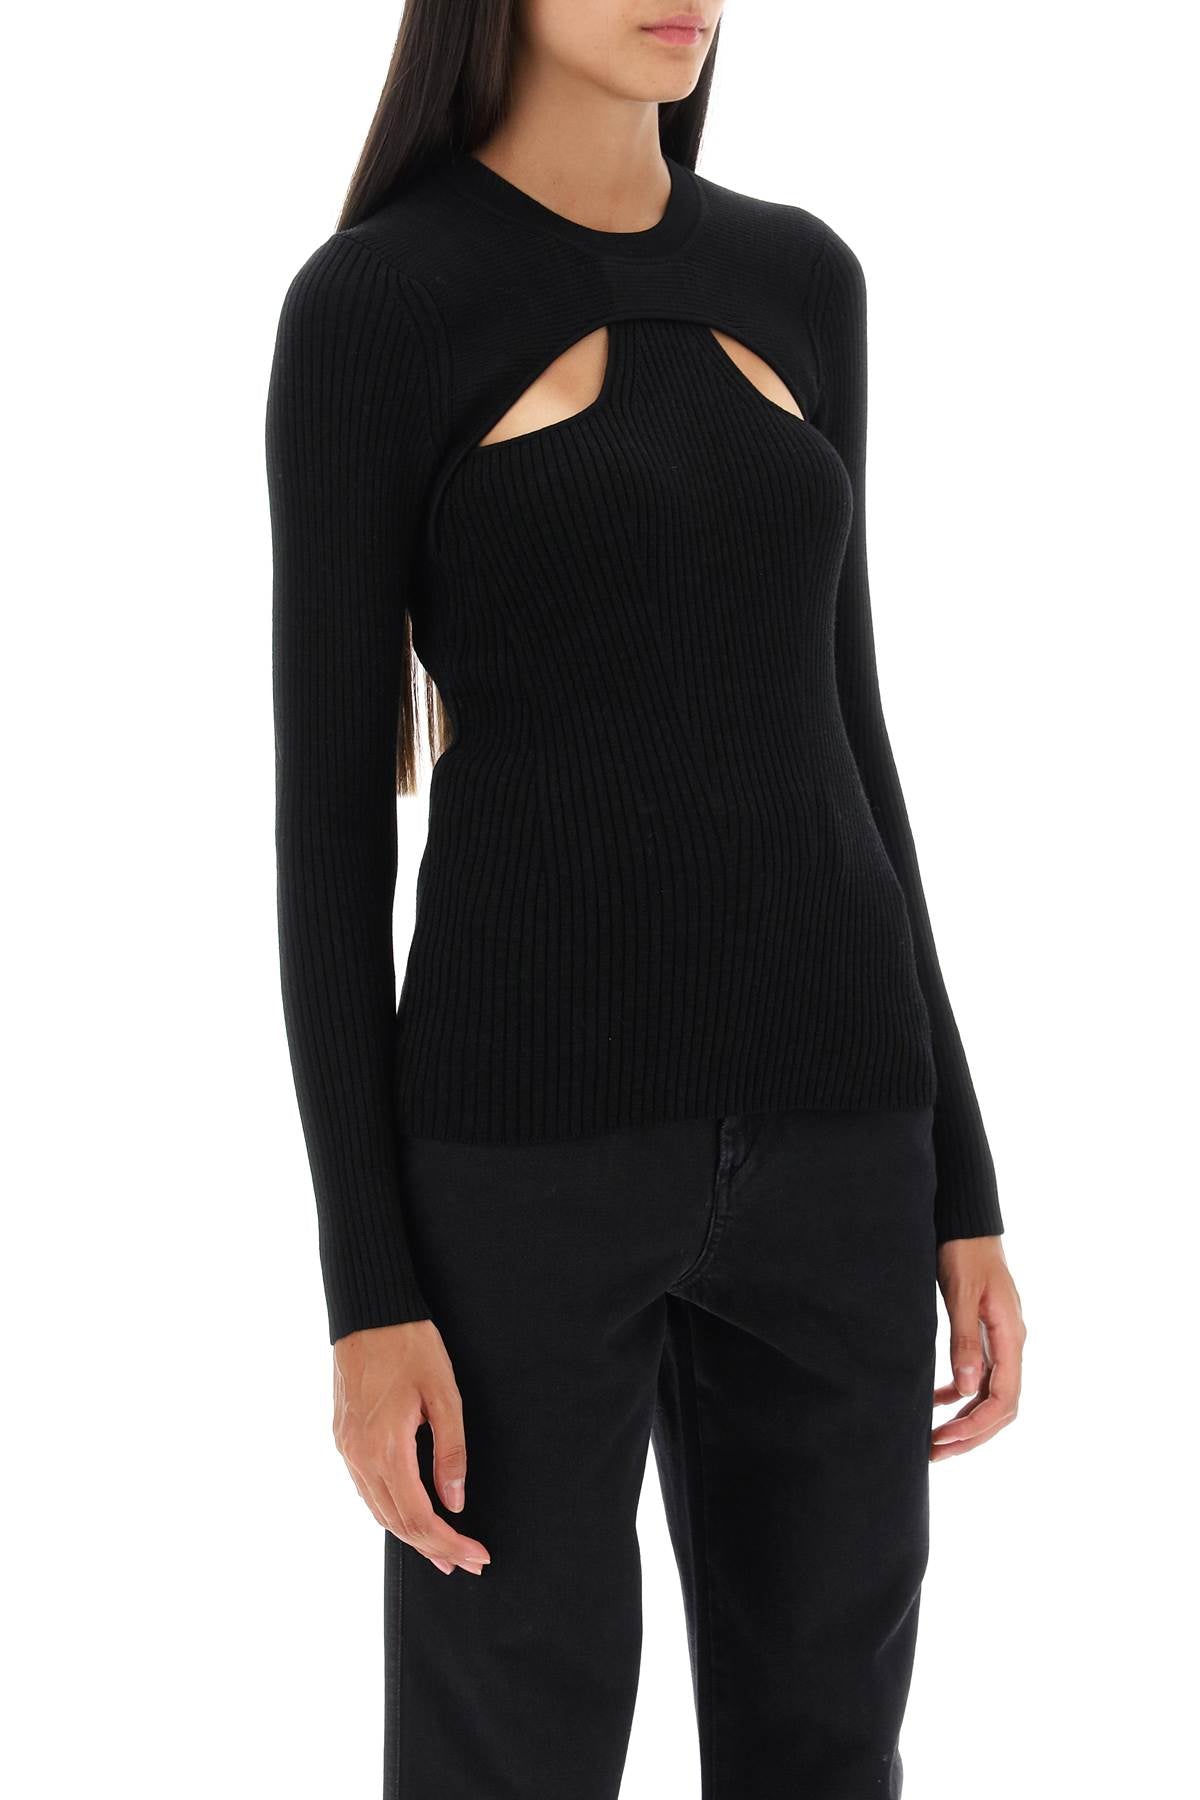 Isabel marant 'zana' cut-out sweater in ribbed knit-1